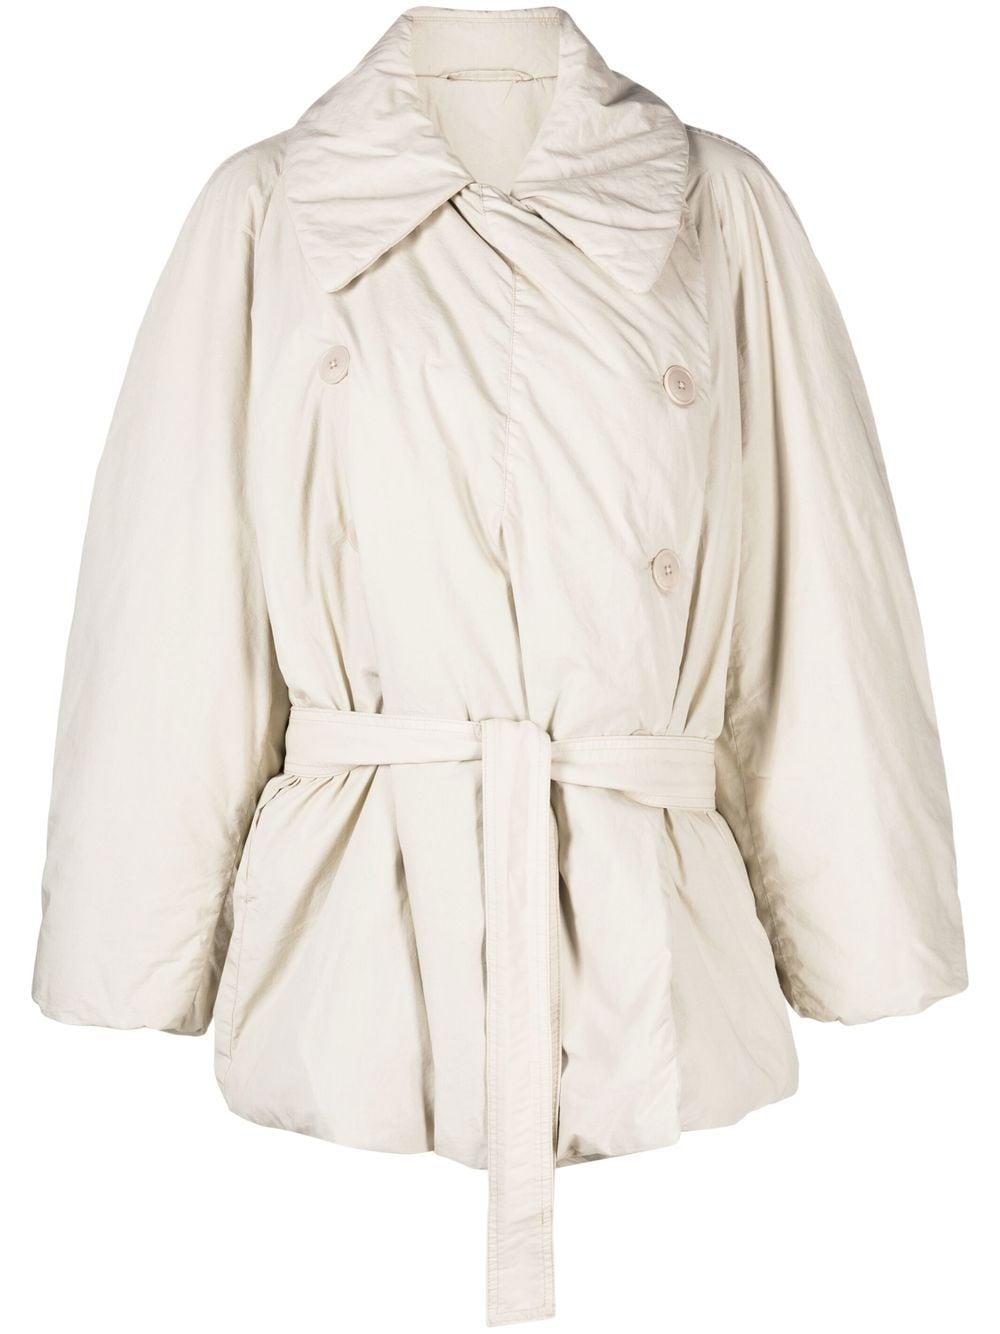 Lemaire Double-breasted Belted Coat in Natural | Lyst